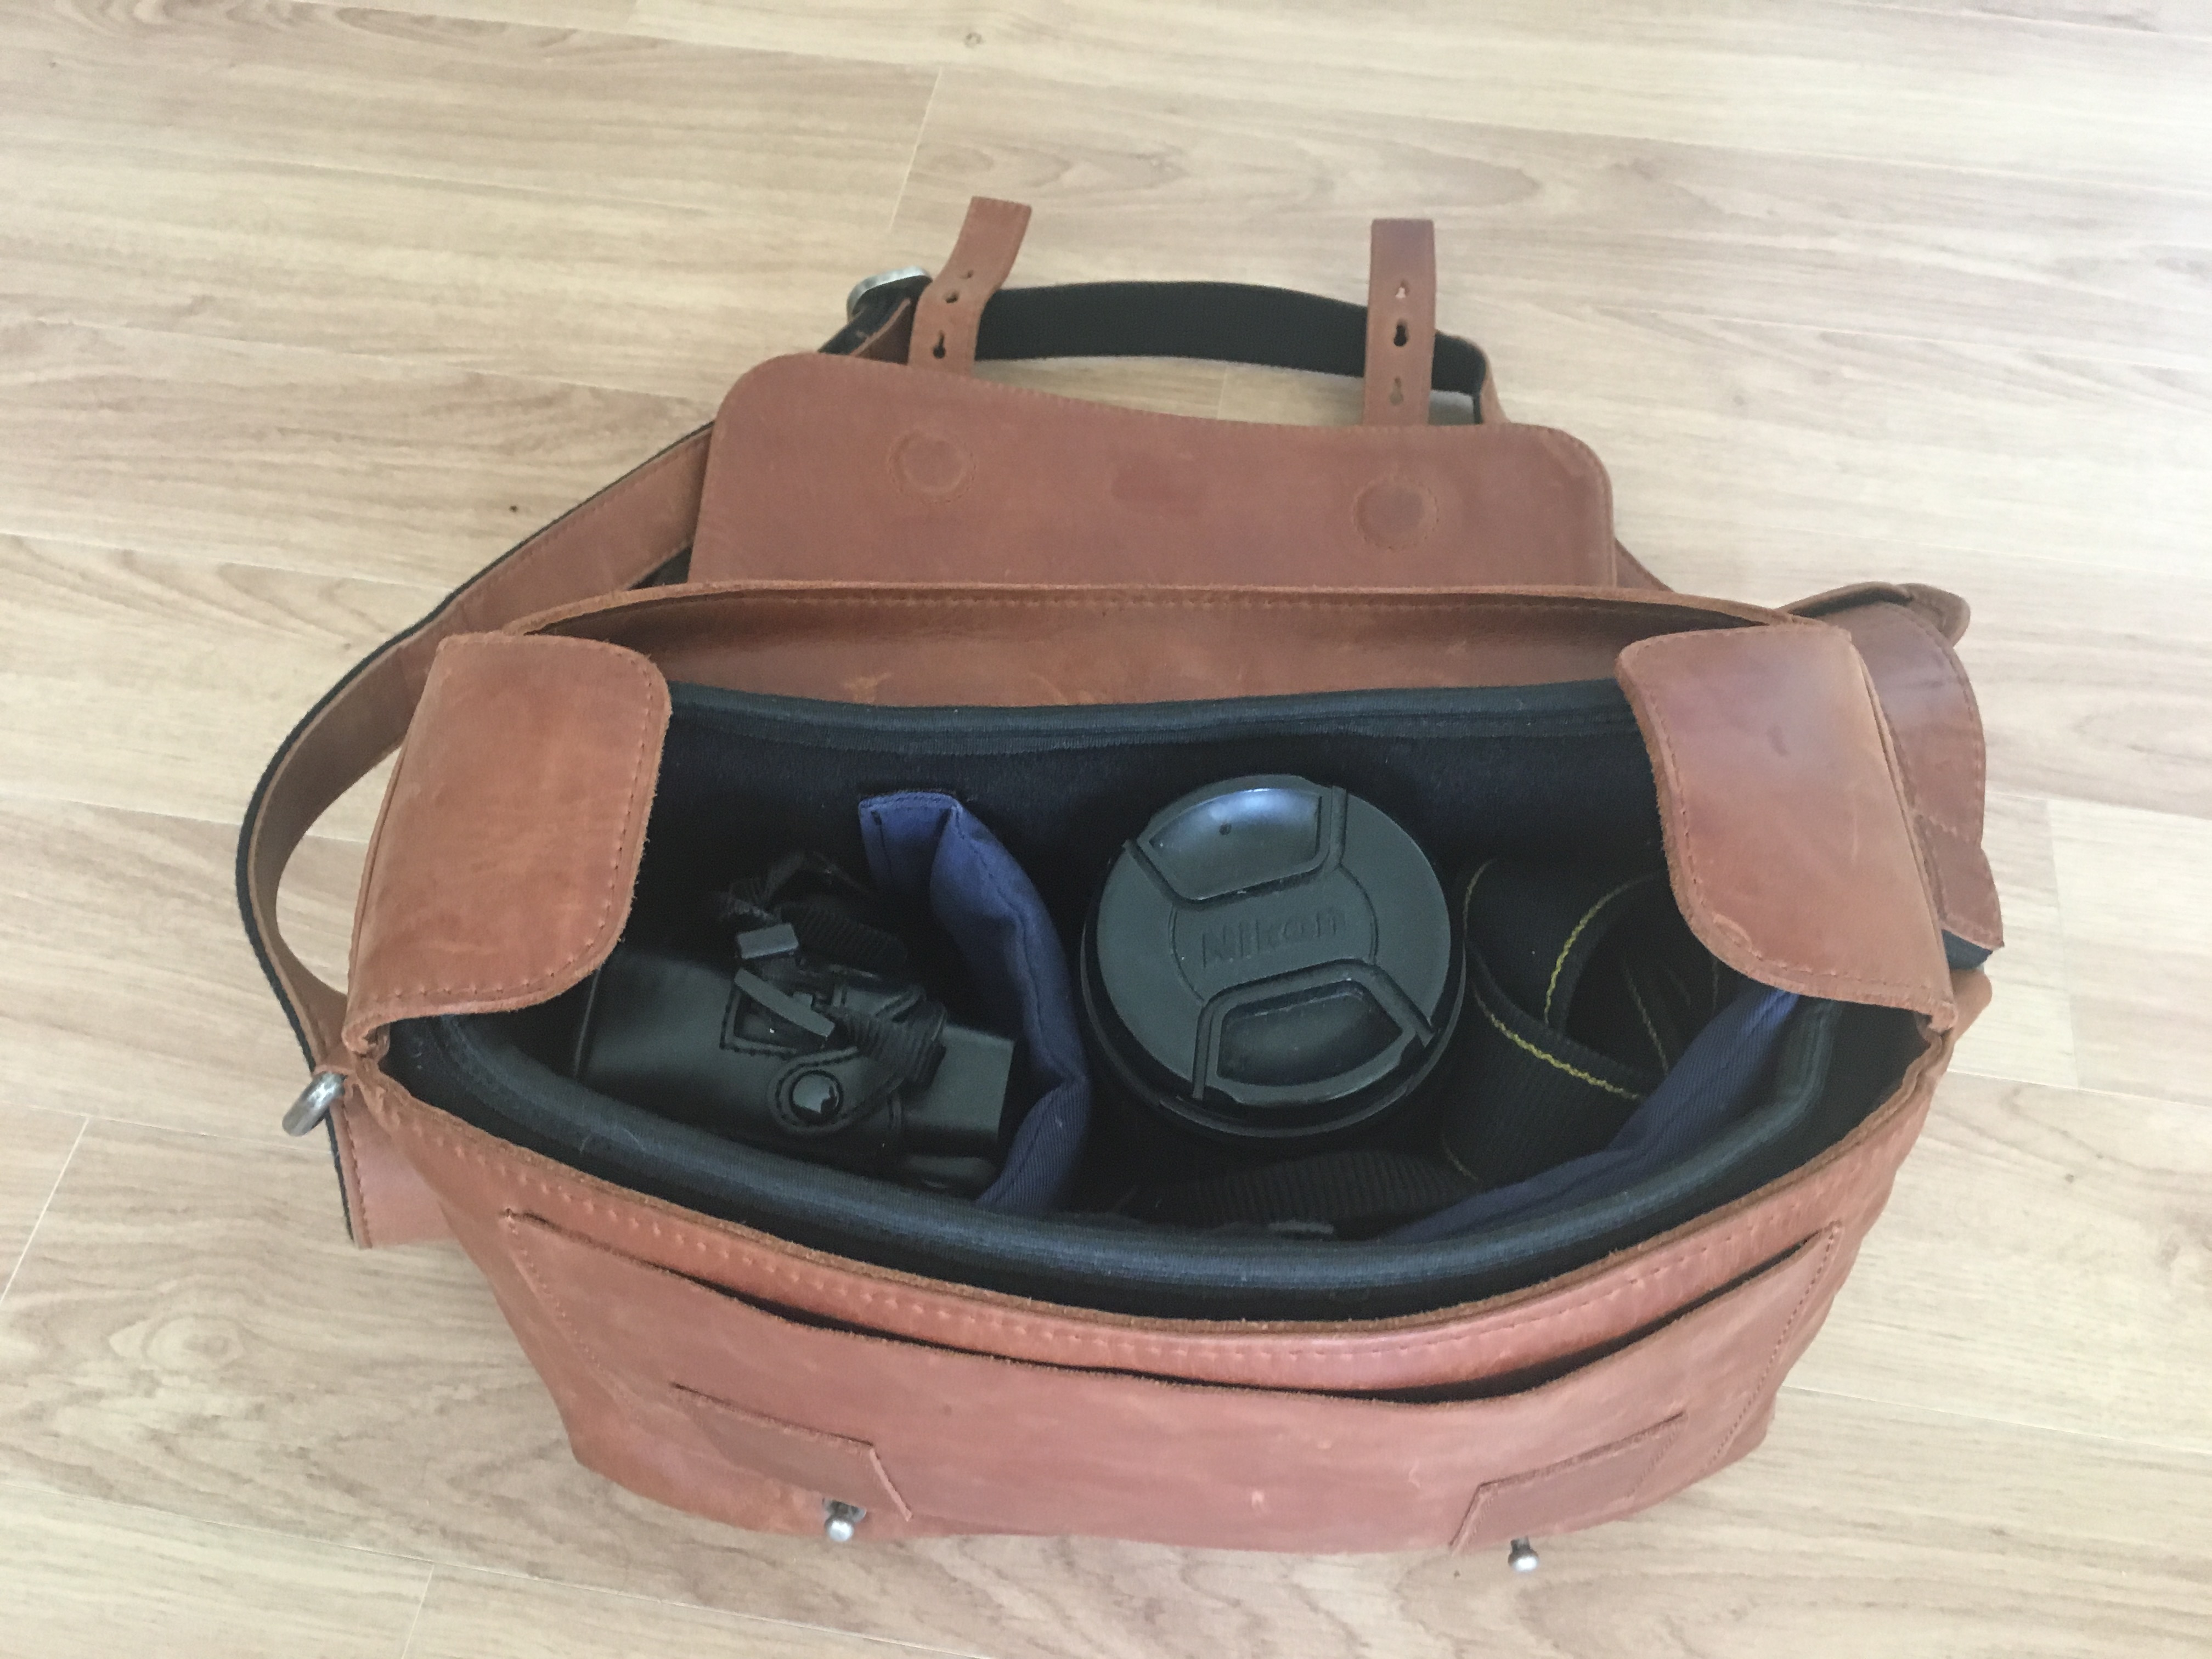 Inner compartments of the Pompidoo Tokyo bag